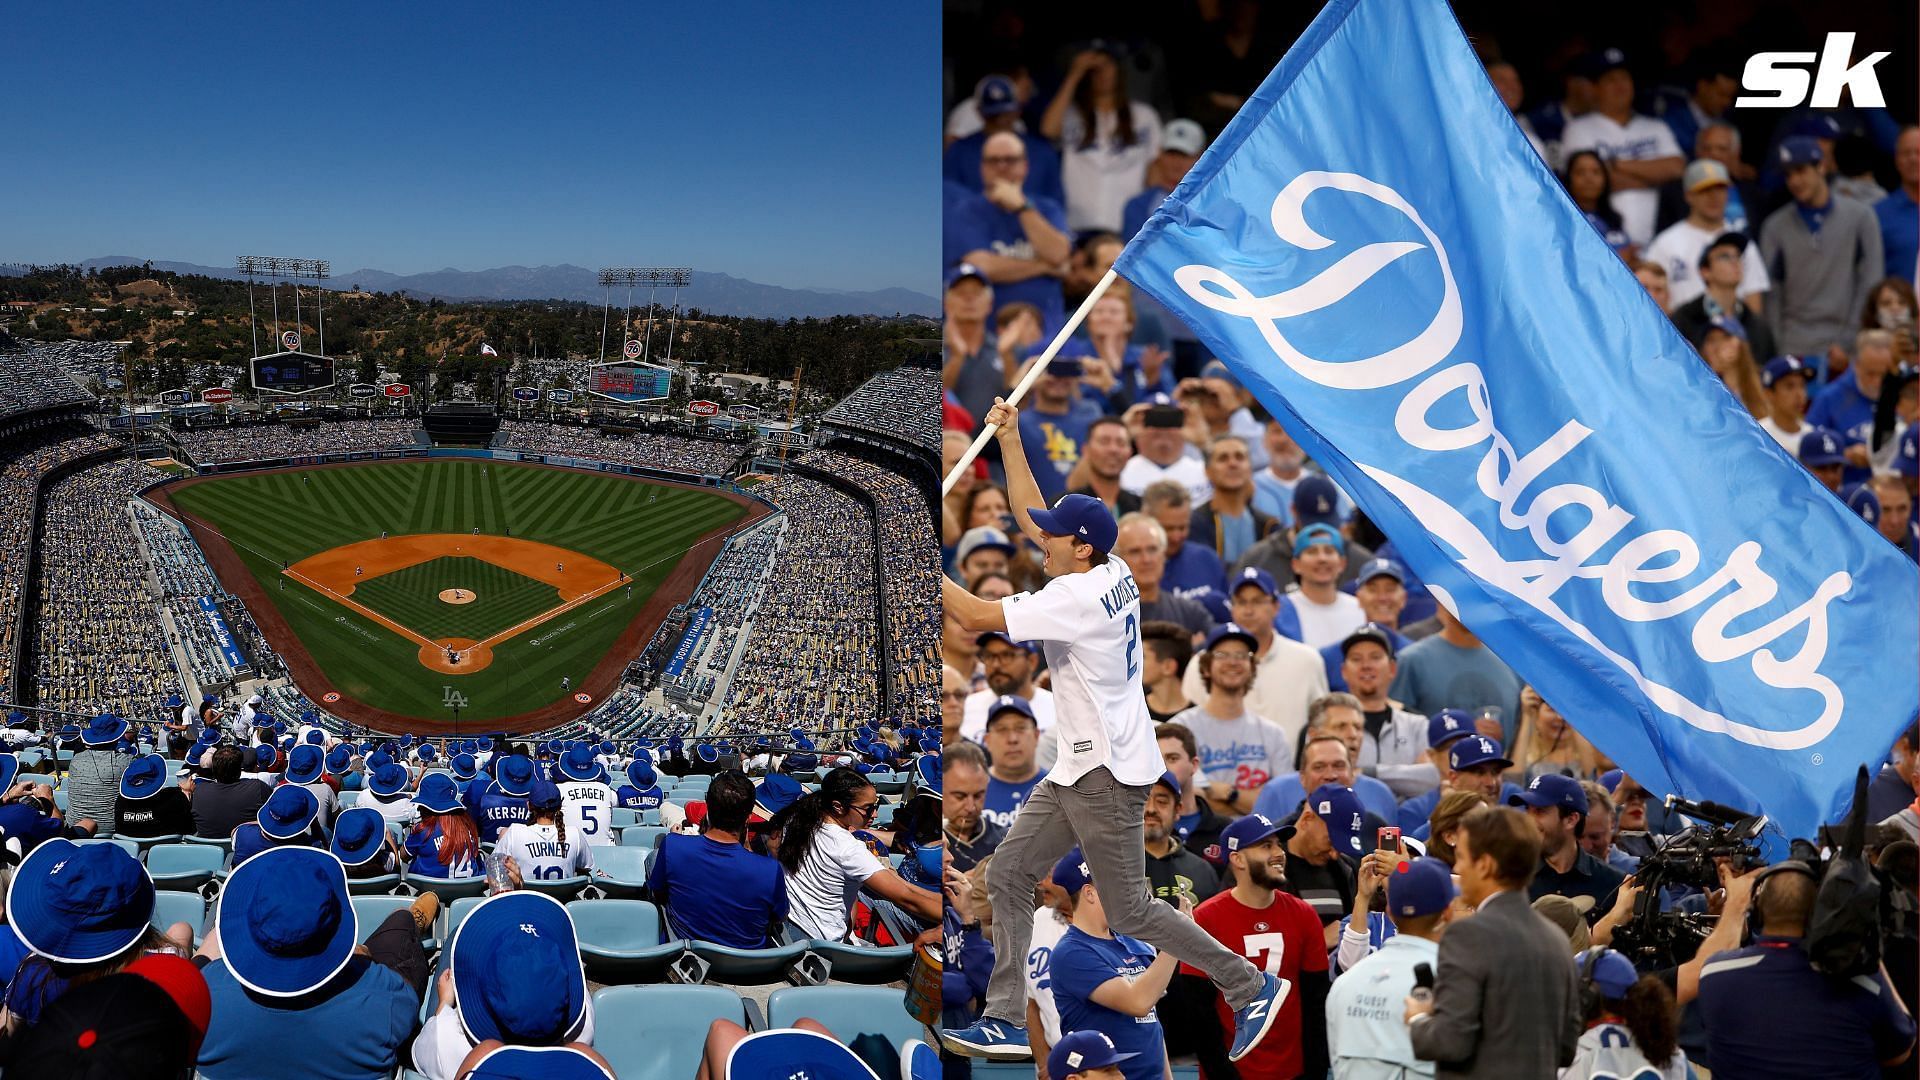 Dodger Stadium is an iconic MLB park with a rich history